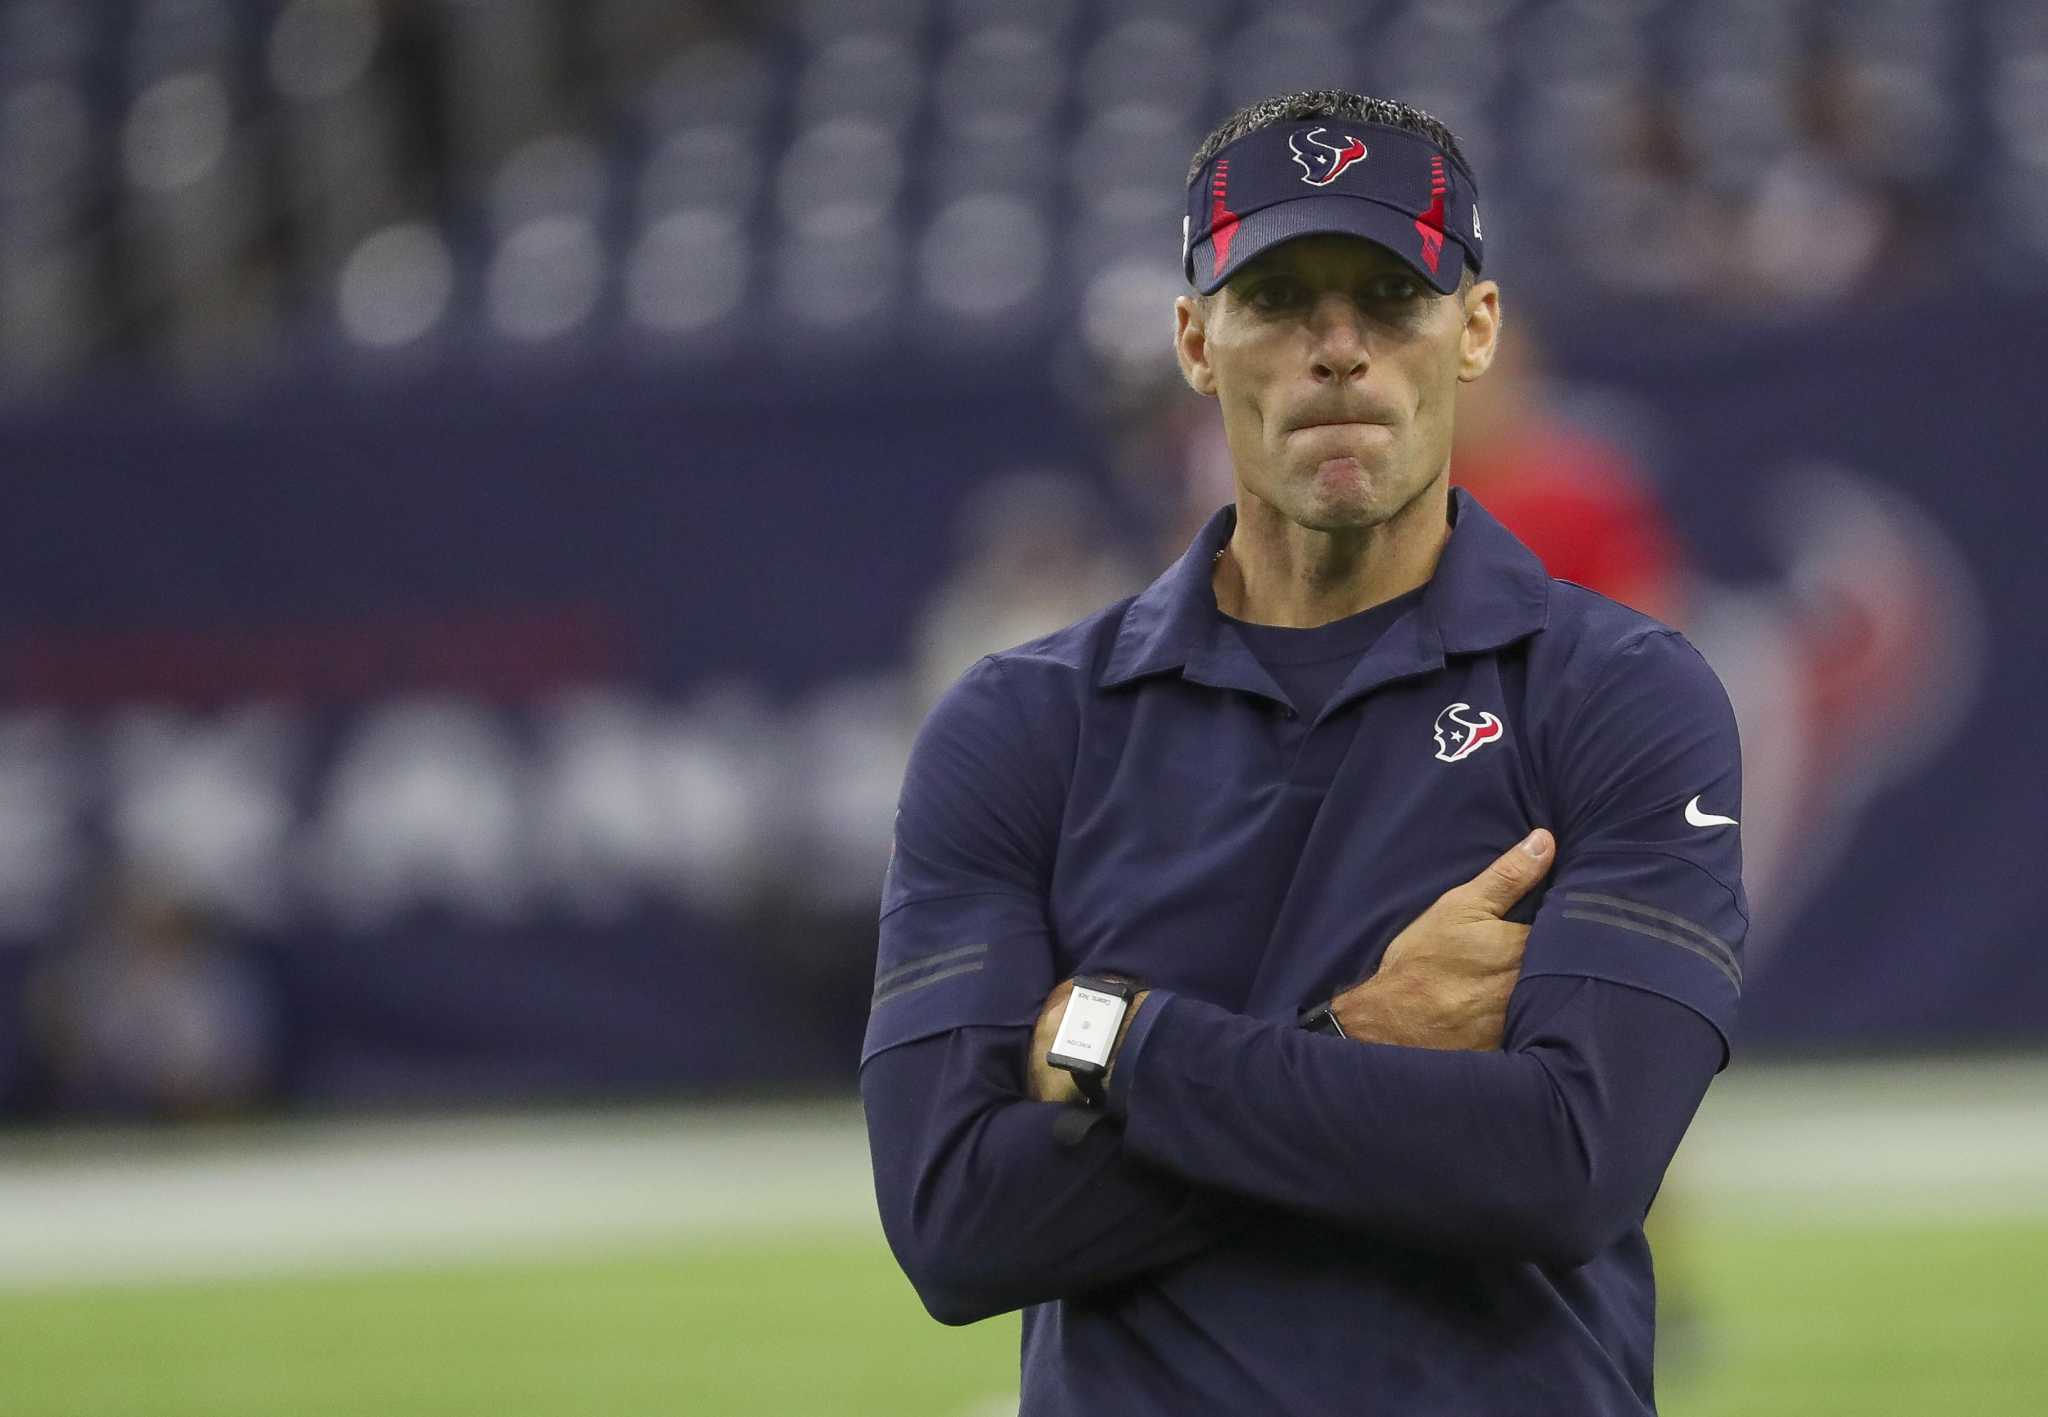 Inside the mindset of Nick Caserio, the GM chosen to fix the Houston Texans